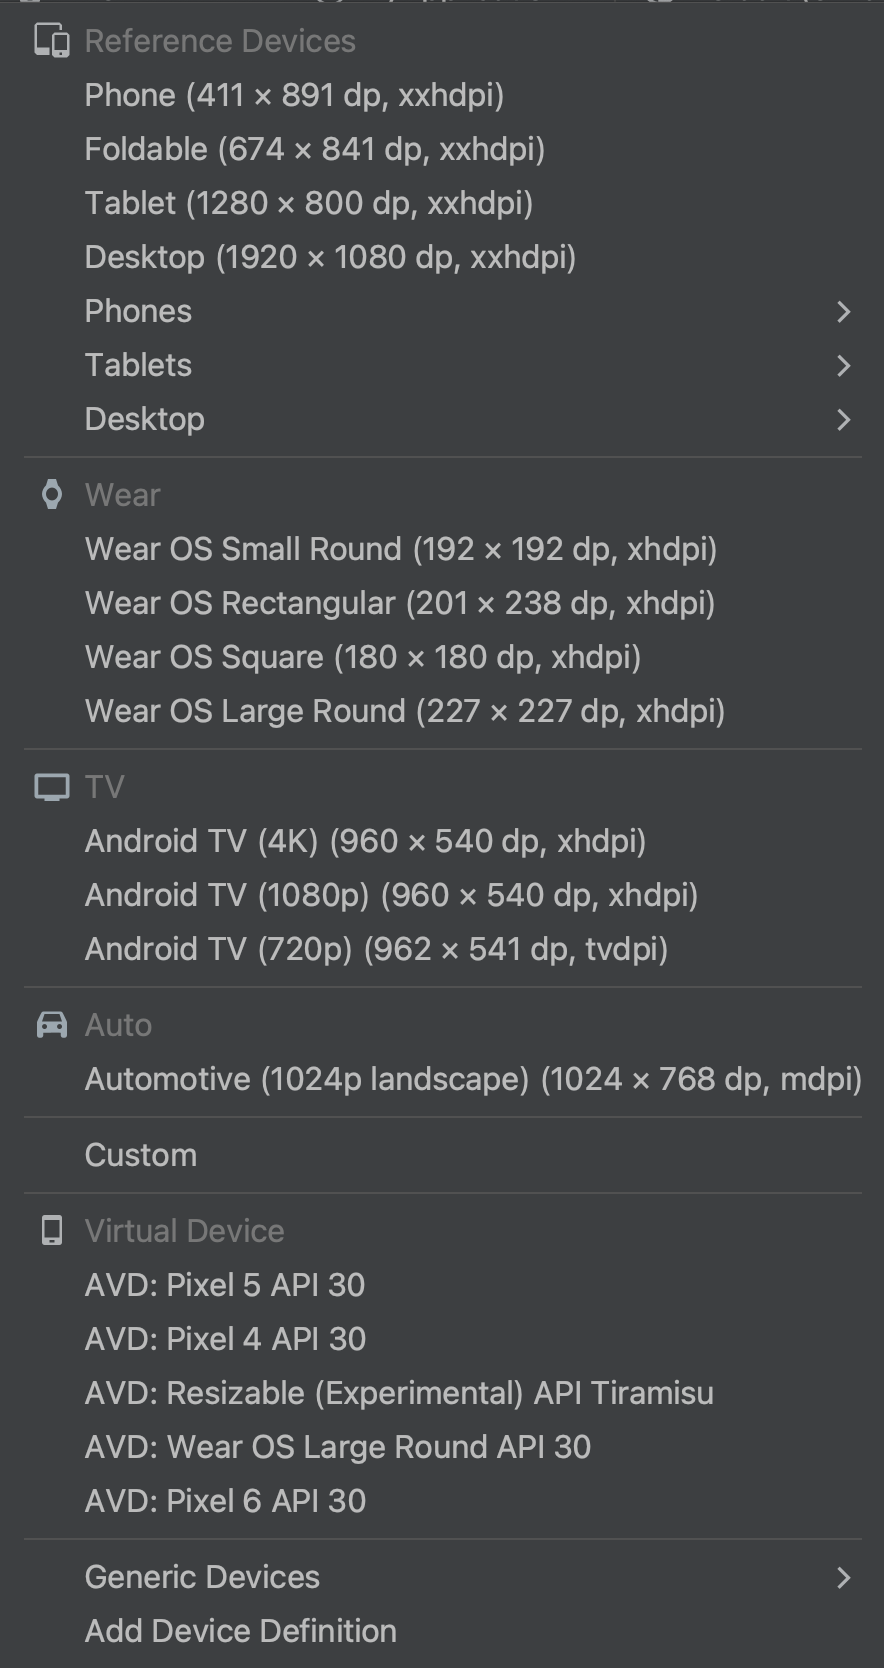 he device list menu with Reference Devices